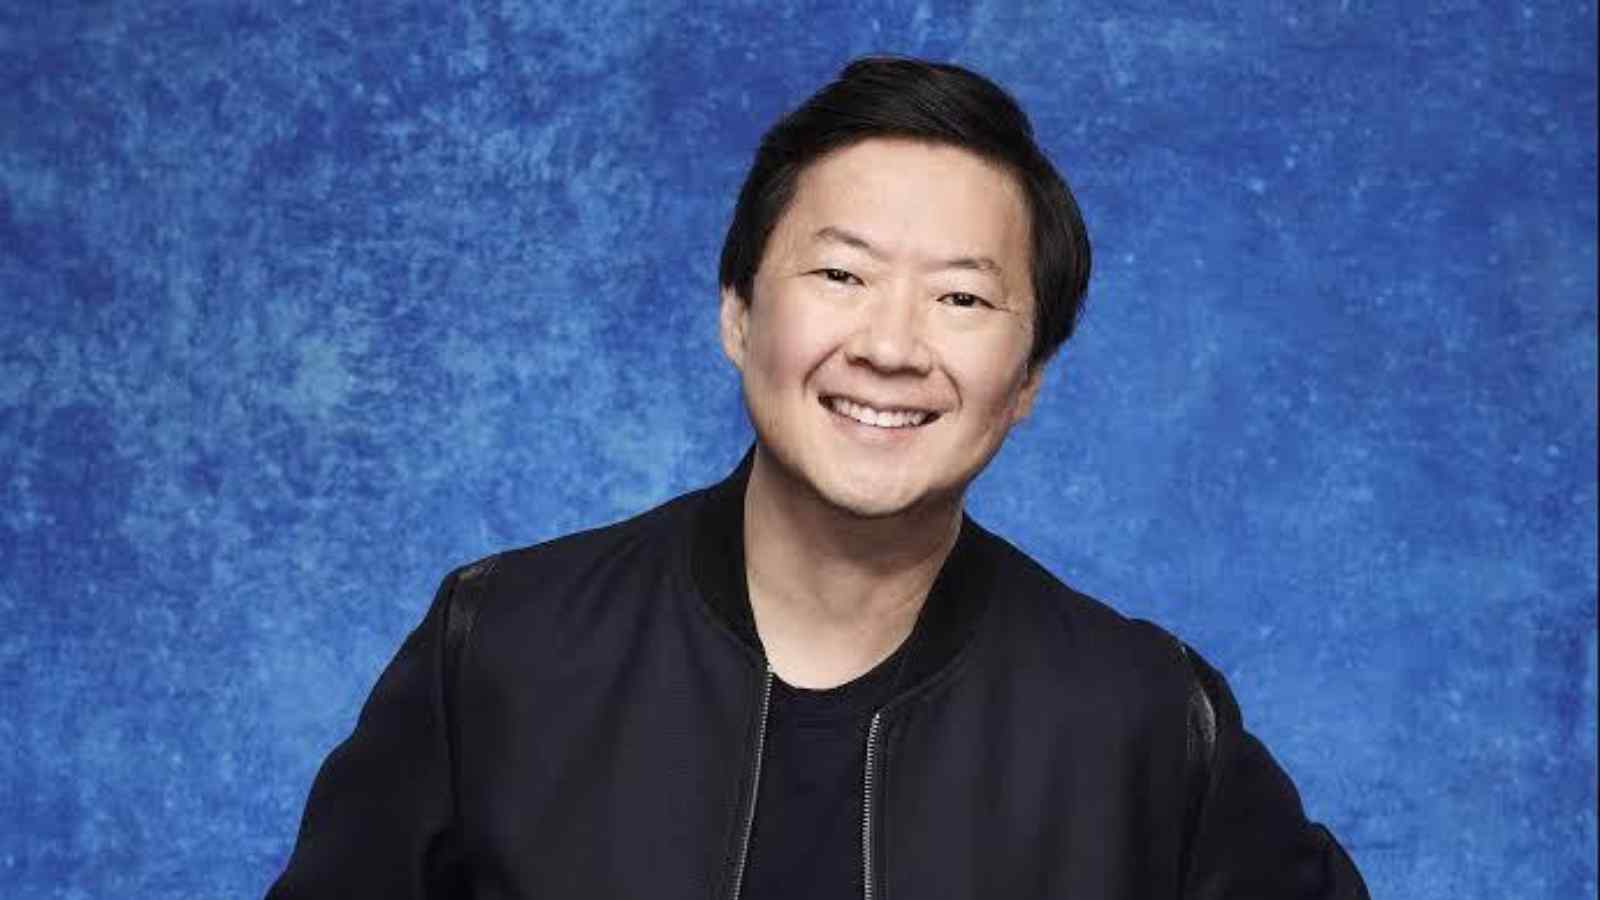 Ken Jeong is a General Practitioner along with being an actor